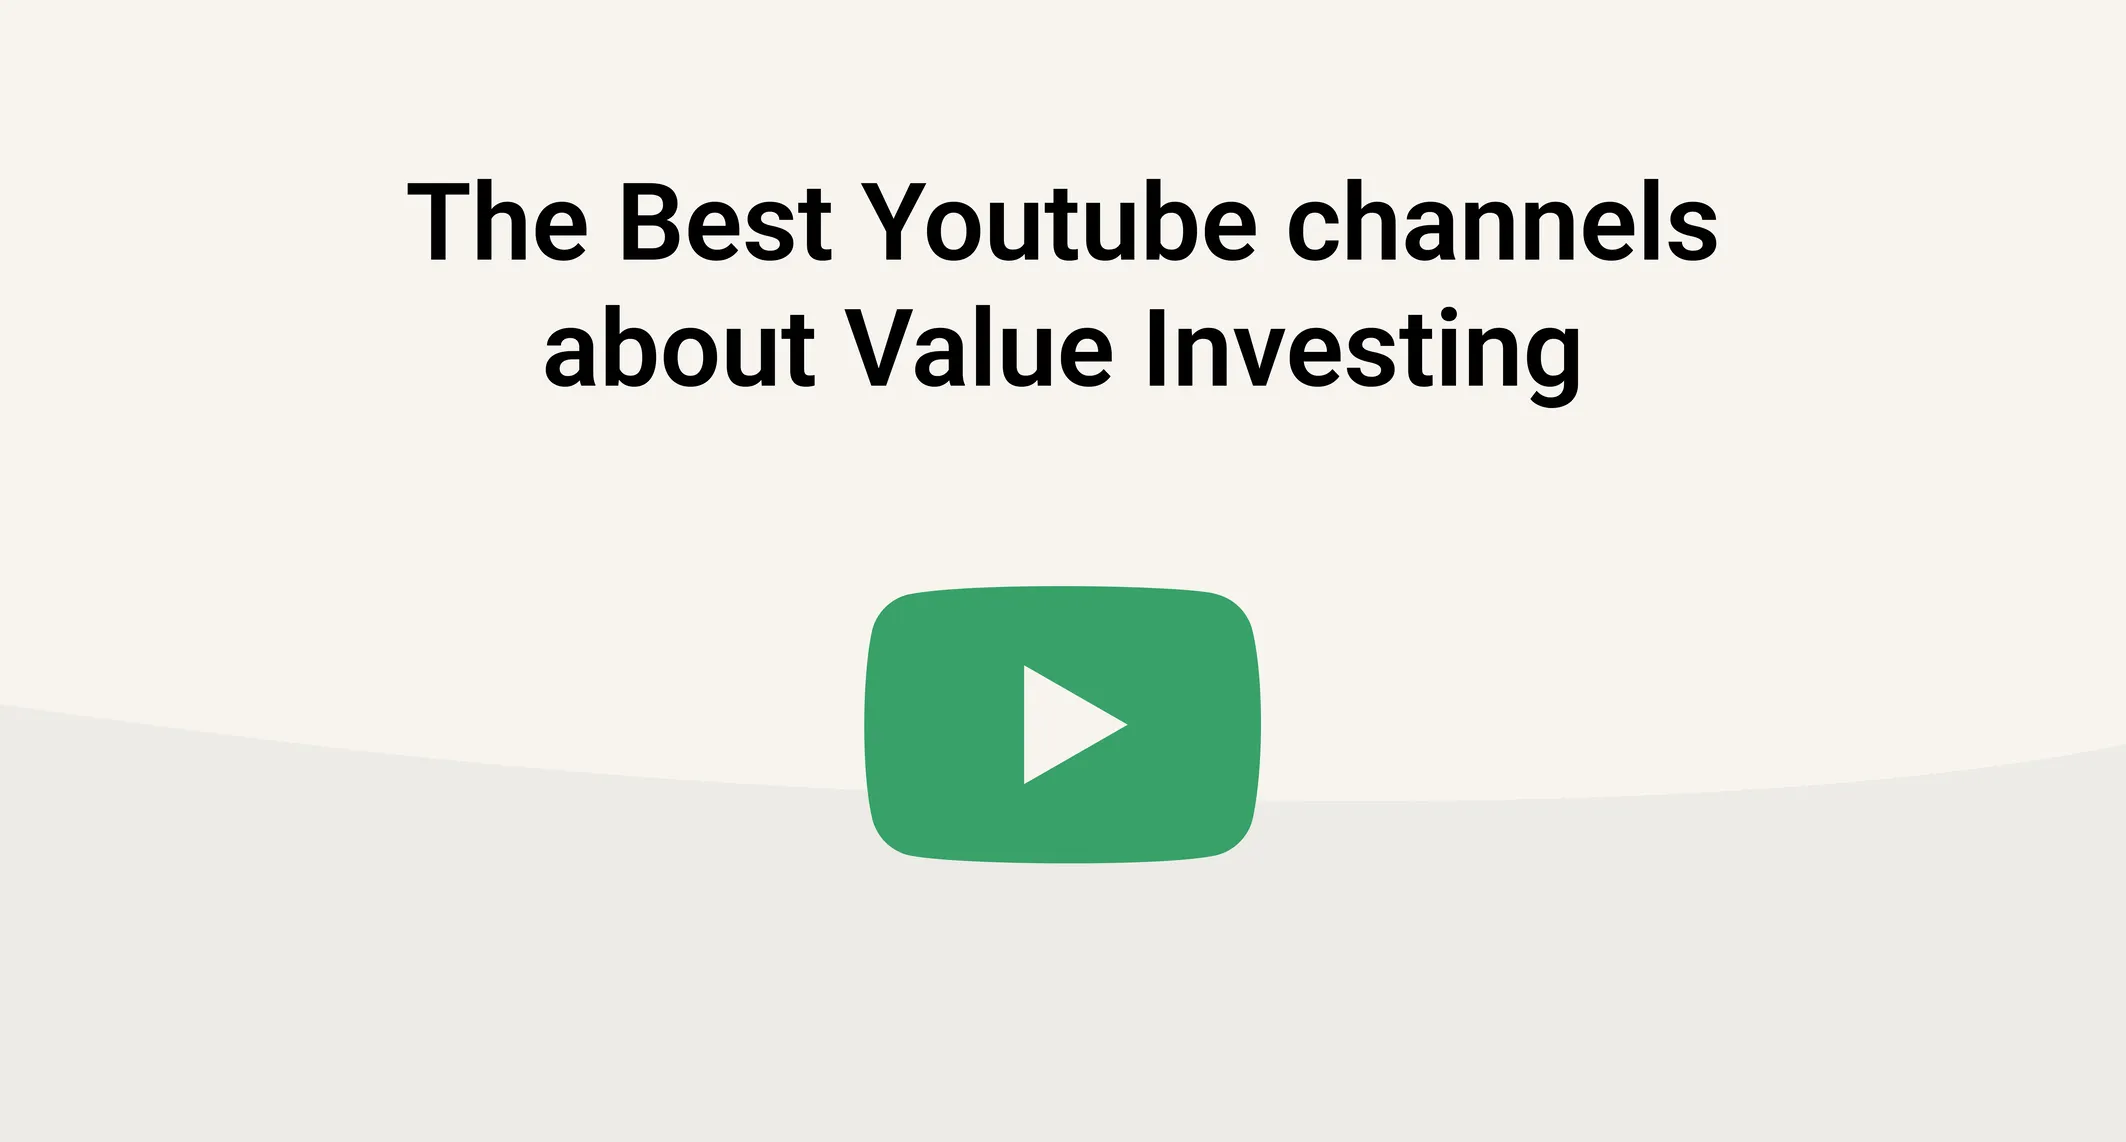 The Best Youtube channels about Value Investing